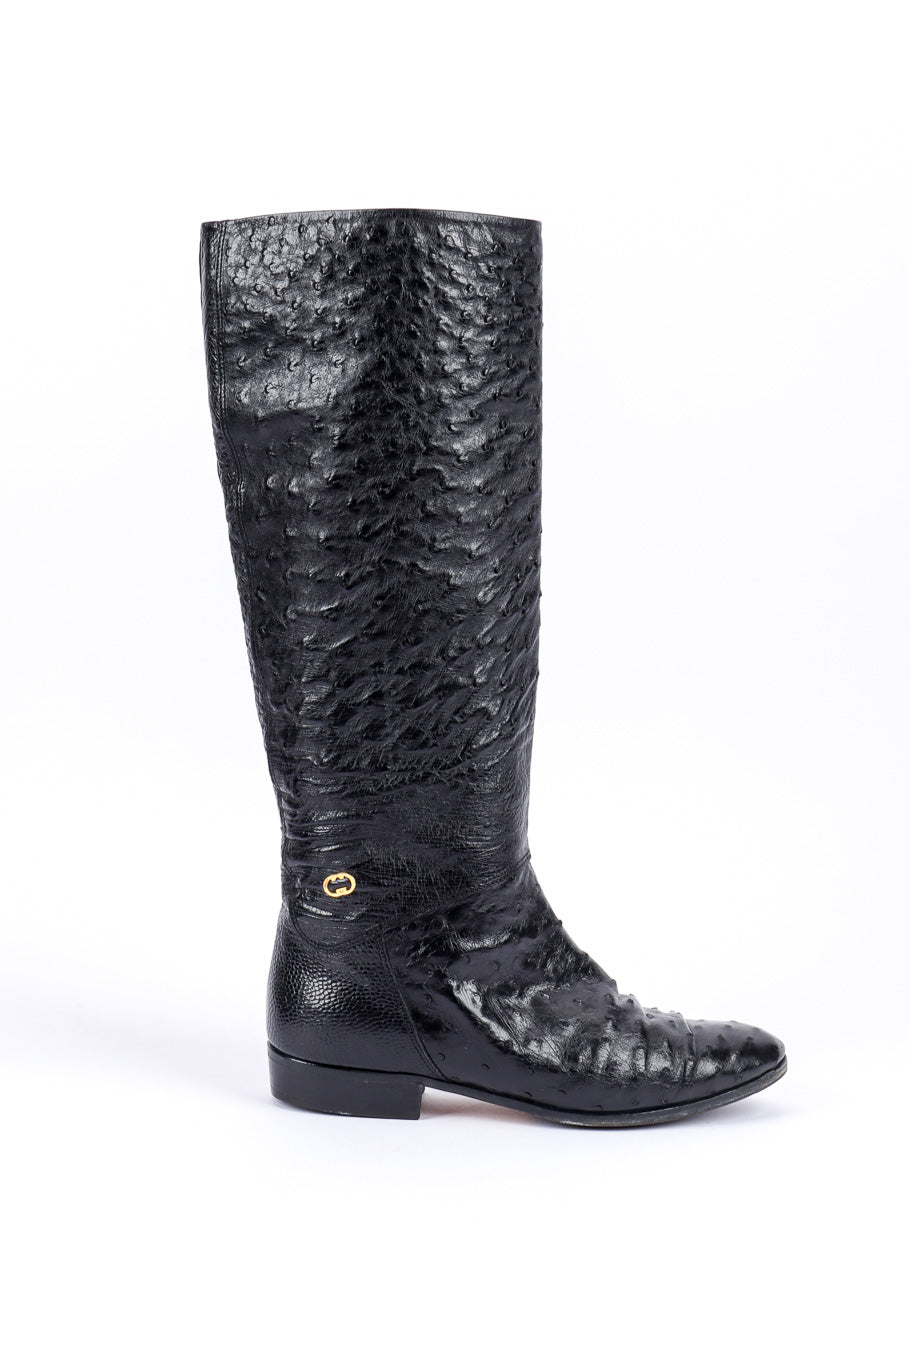 Vintage Gucci Black Ostrich Leather Riding Boot right boot outer view @recessla